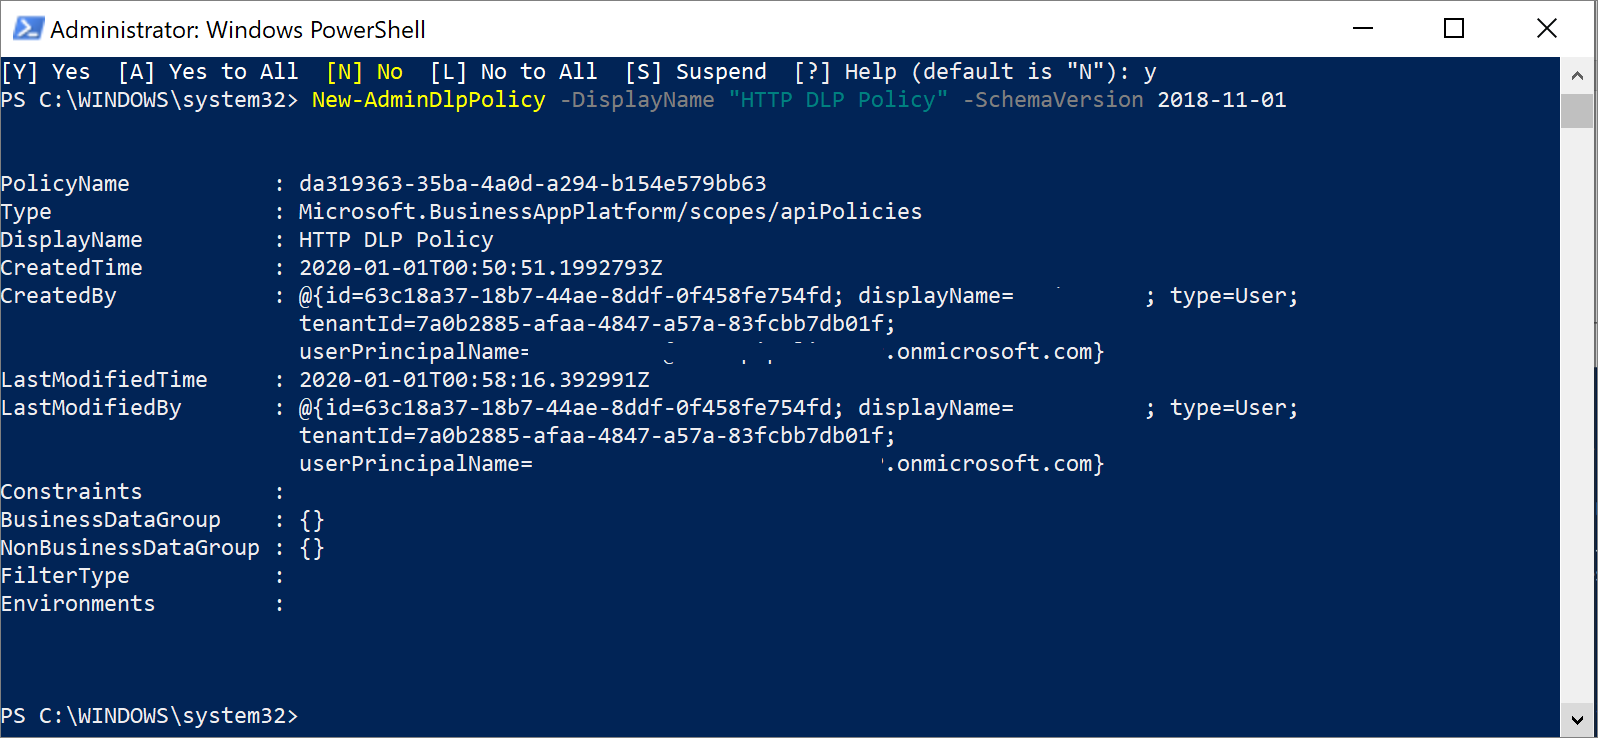 Screenshot of PowerShell results showing PolicyName, Type, DisplayName, CreatedTime, CreatedBy, and other attributes.